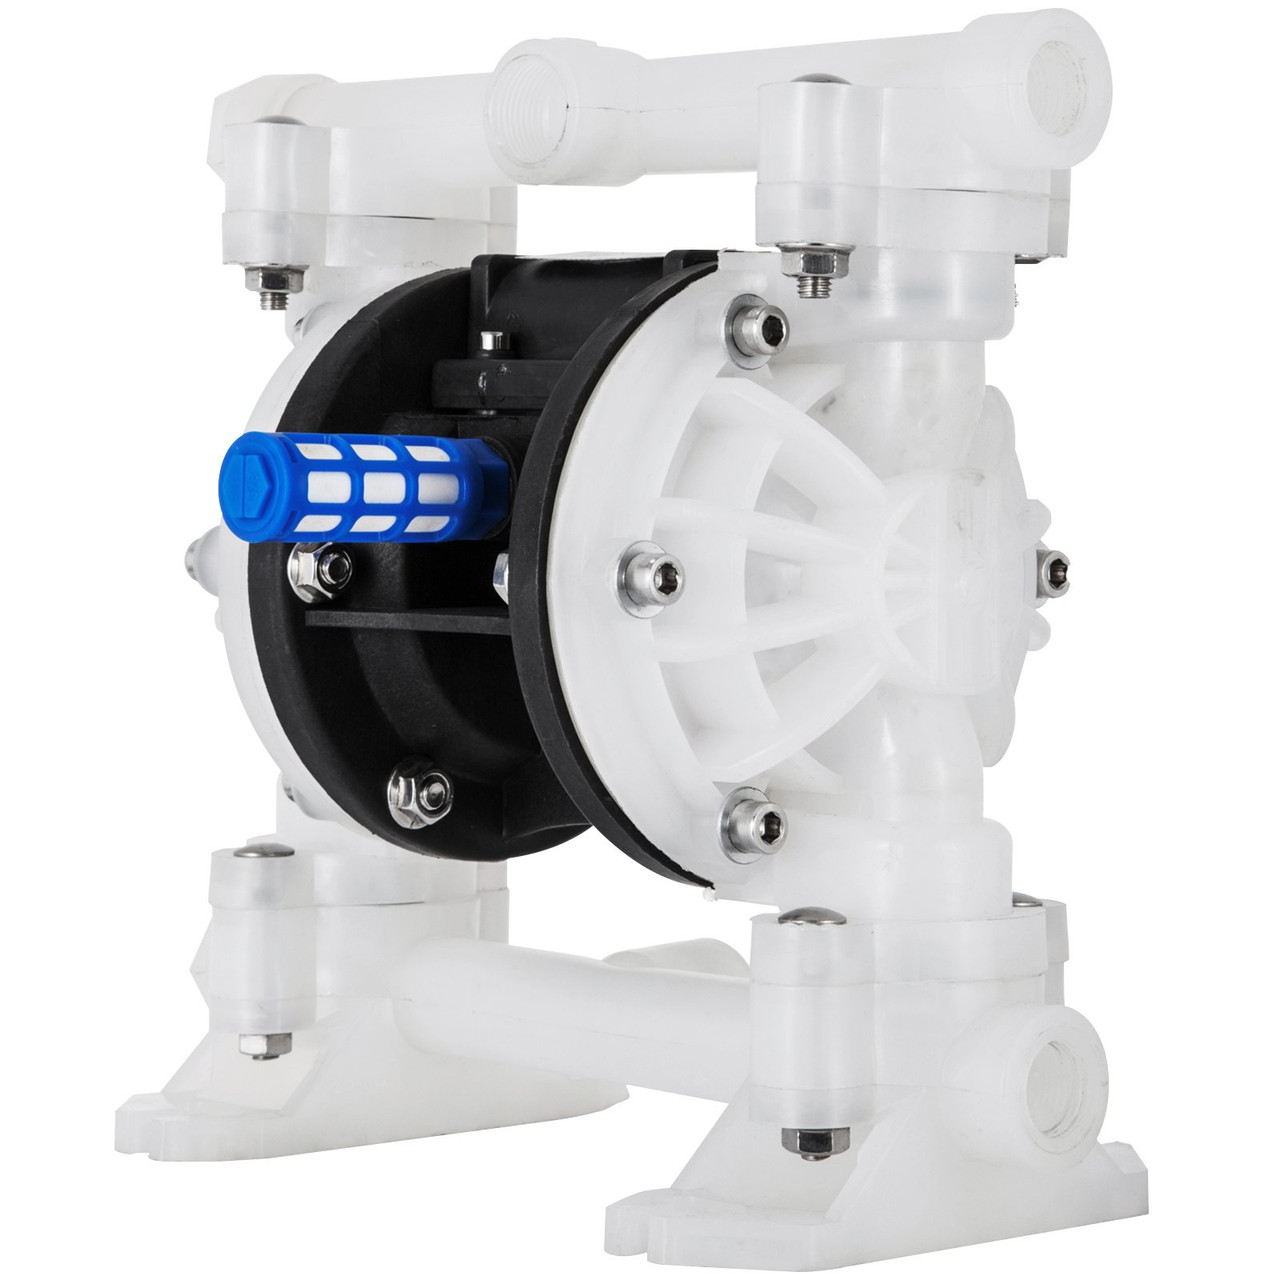 Air-Operated Double Diaphragm Pump, 1/2 in Inlet & Outlet, Polypropylene Body, 8.8 GPM & Max 120PSI, PTFE Diaphragm Pneumatic Transfer Pump for Petroleum, Diesel, Oil & Low Viscosity Fluids